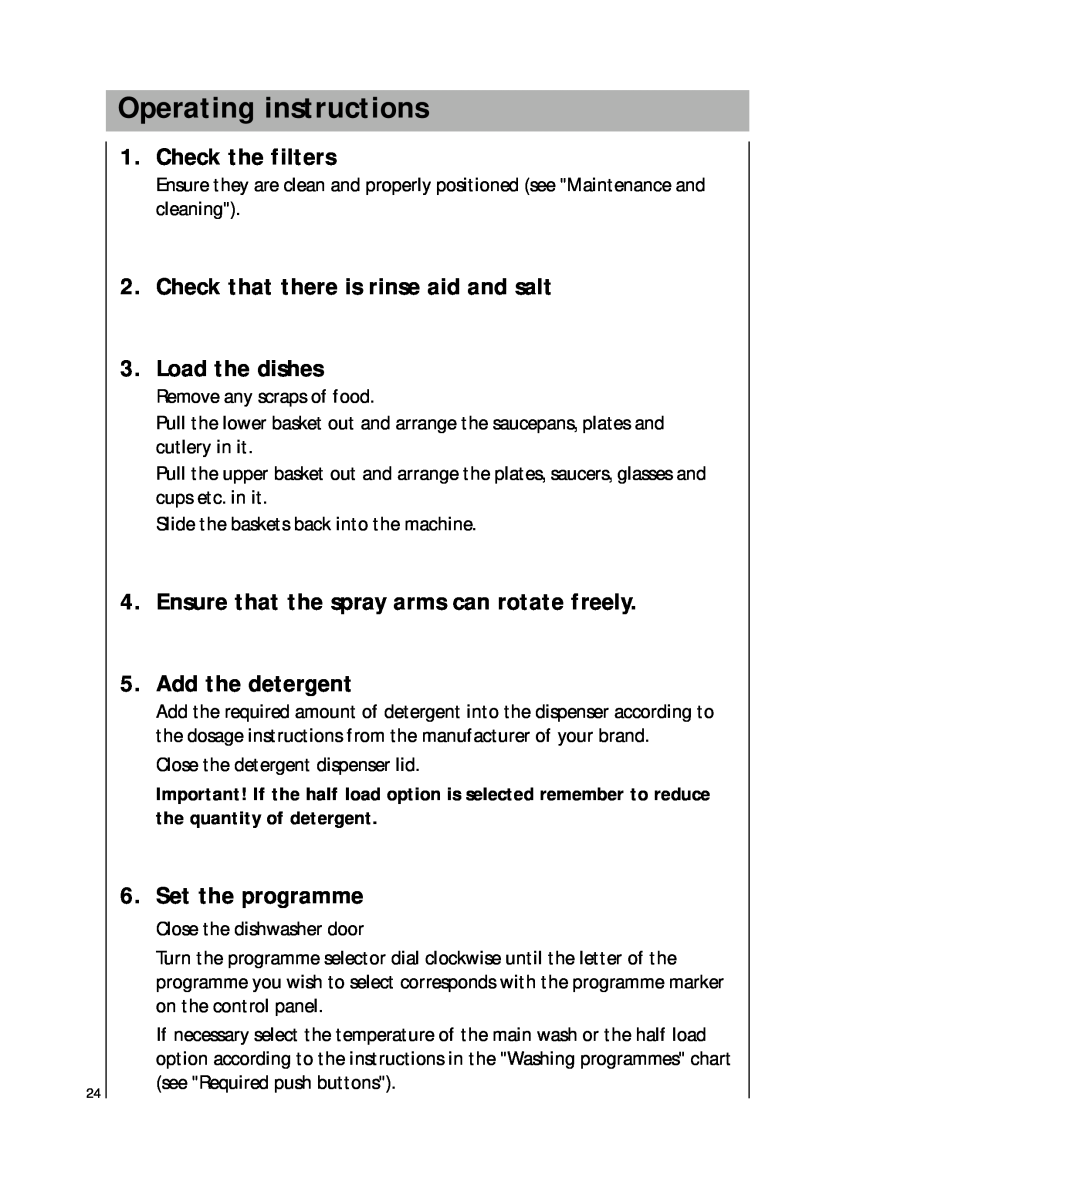 AEG 2807 manual Operating instructions, Check the filters, Check that there is rinse aid and salt, Load the dishes 